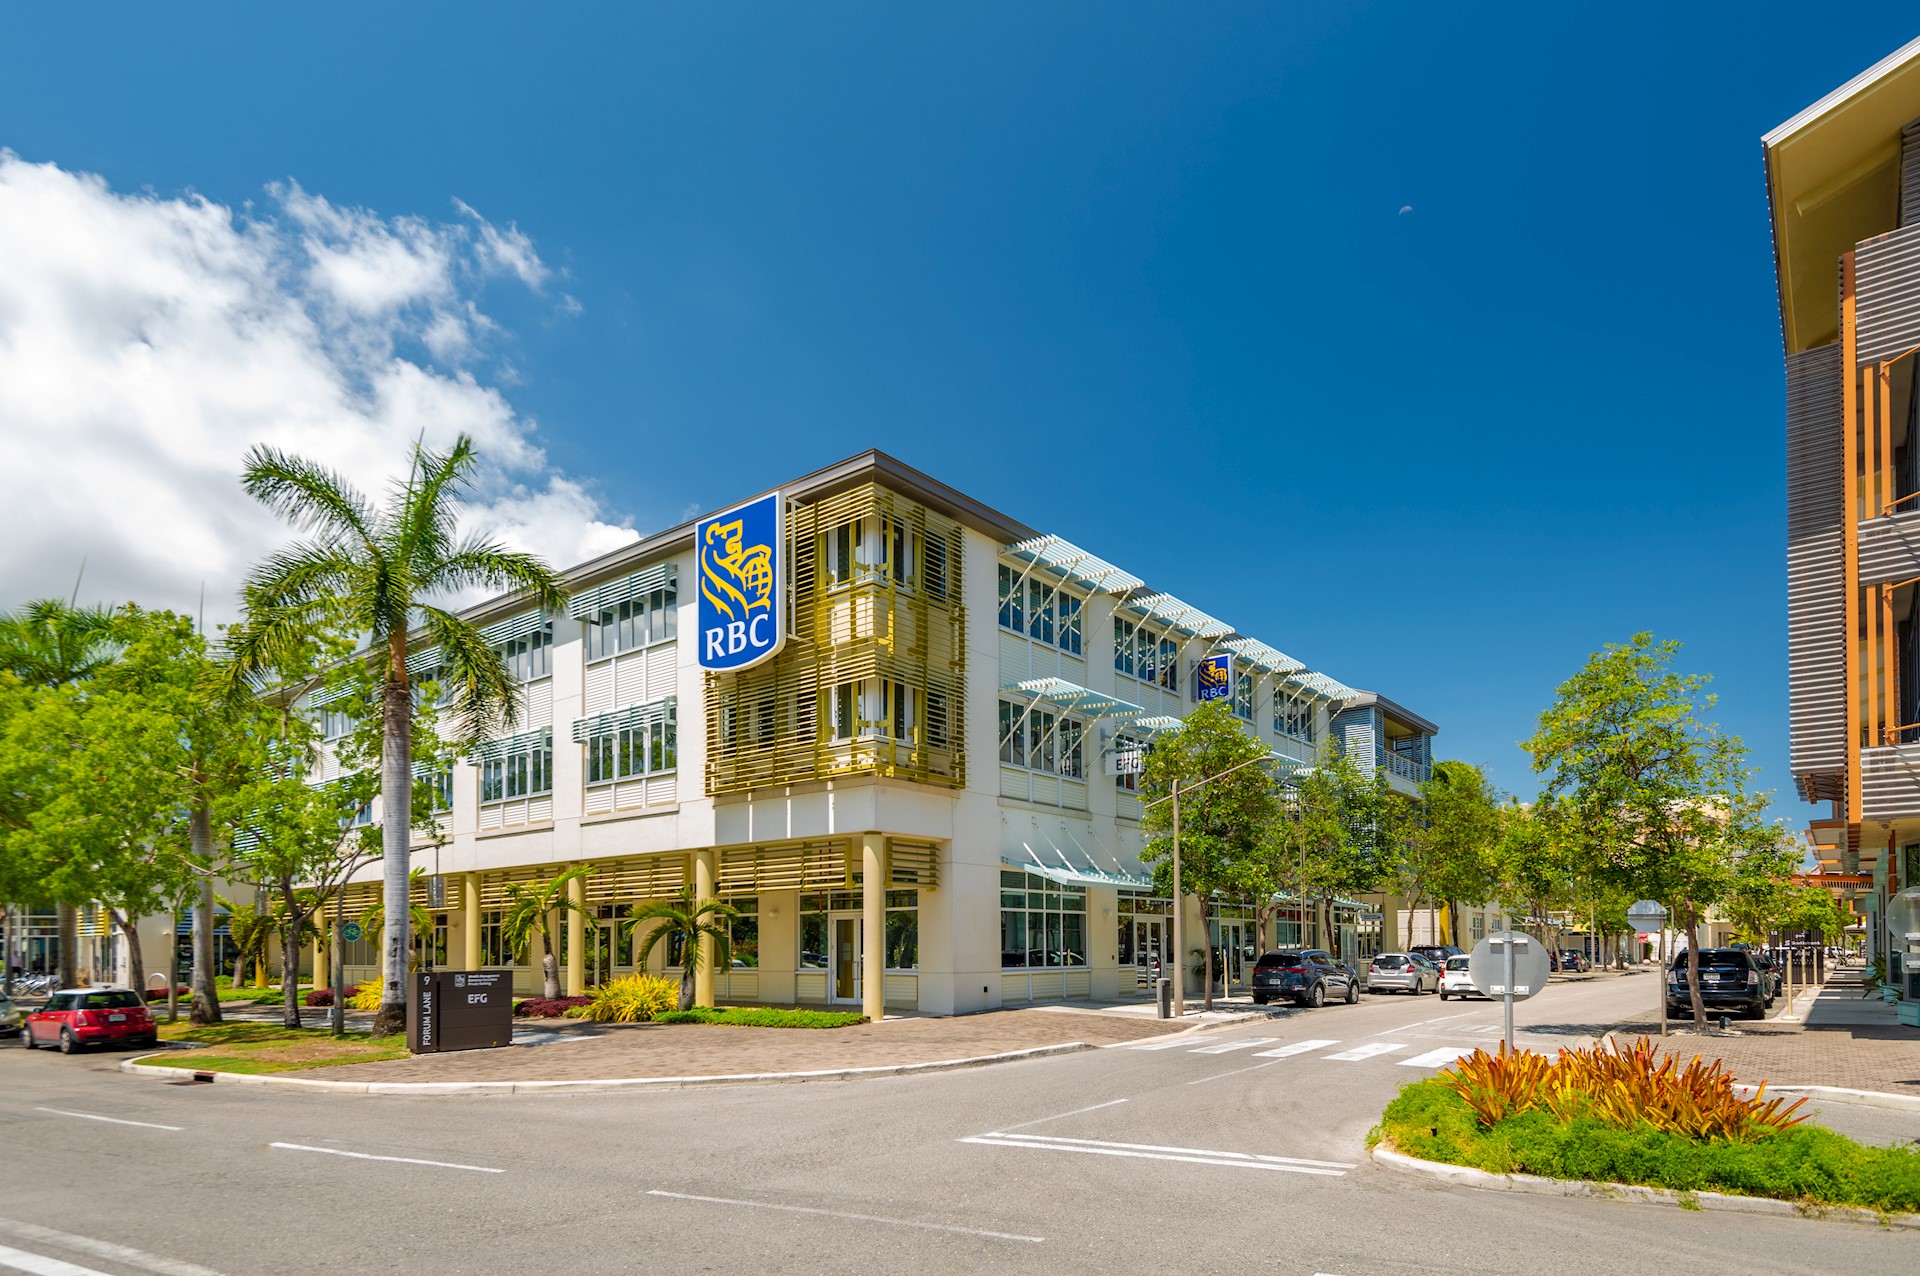 Media Release: RBC Wealth Management opens in Camana Bay Town Centre